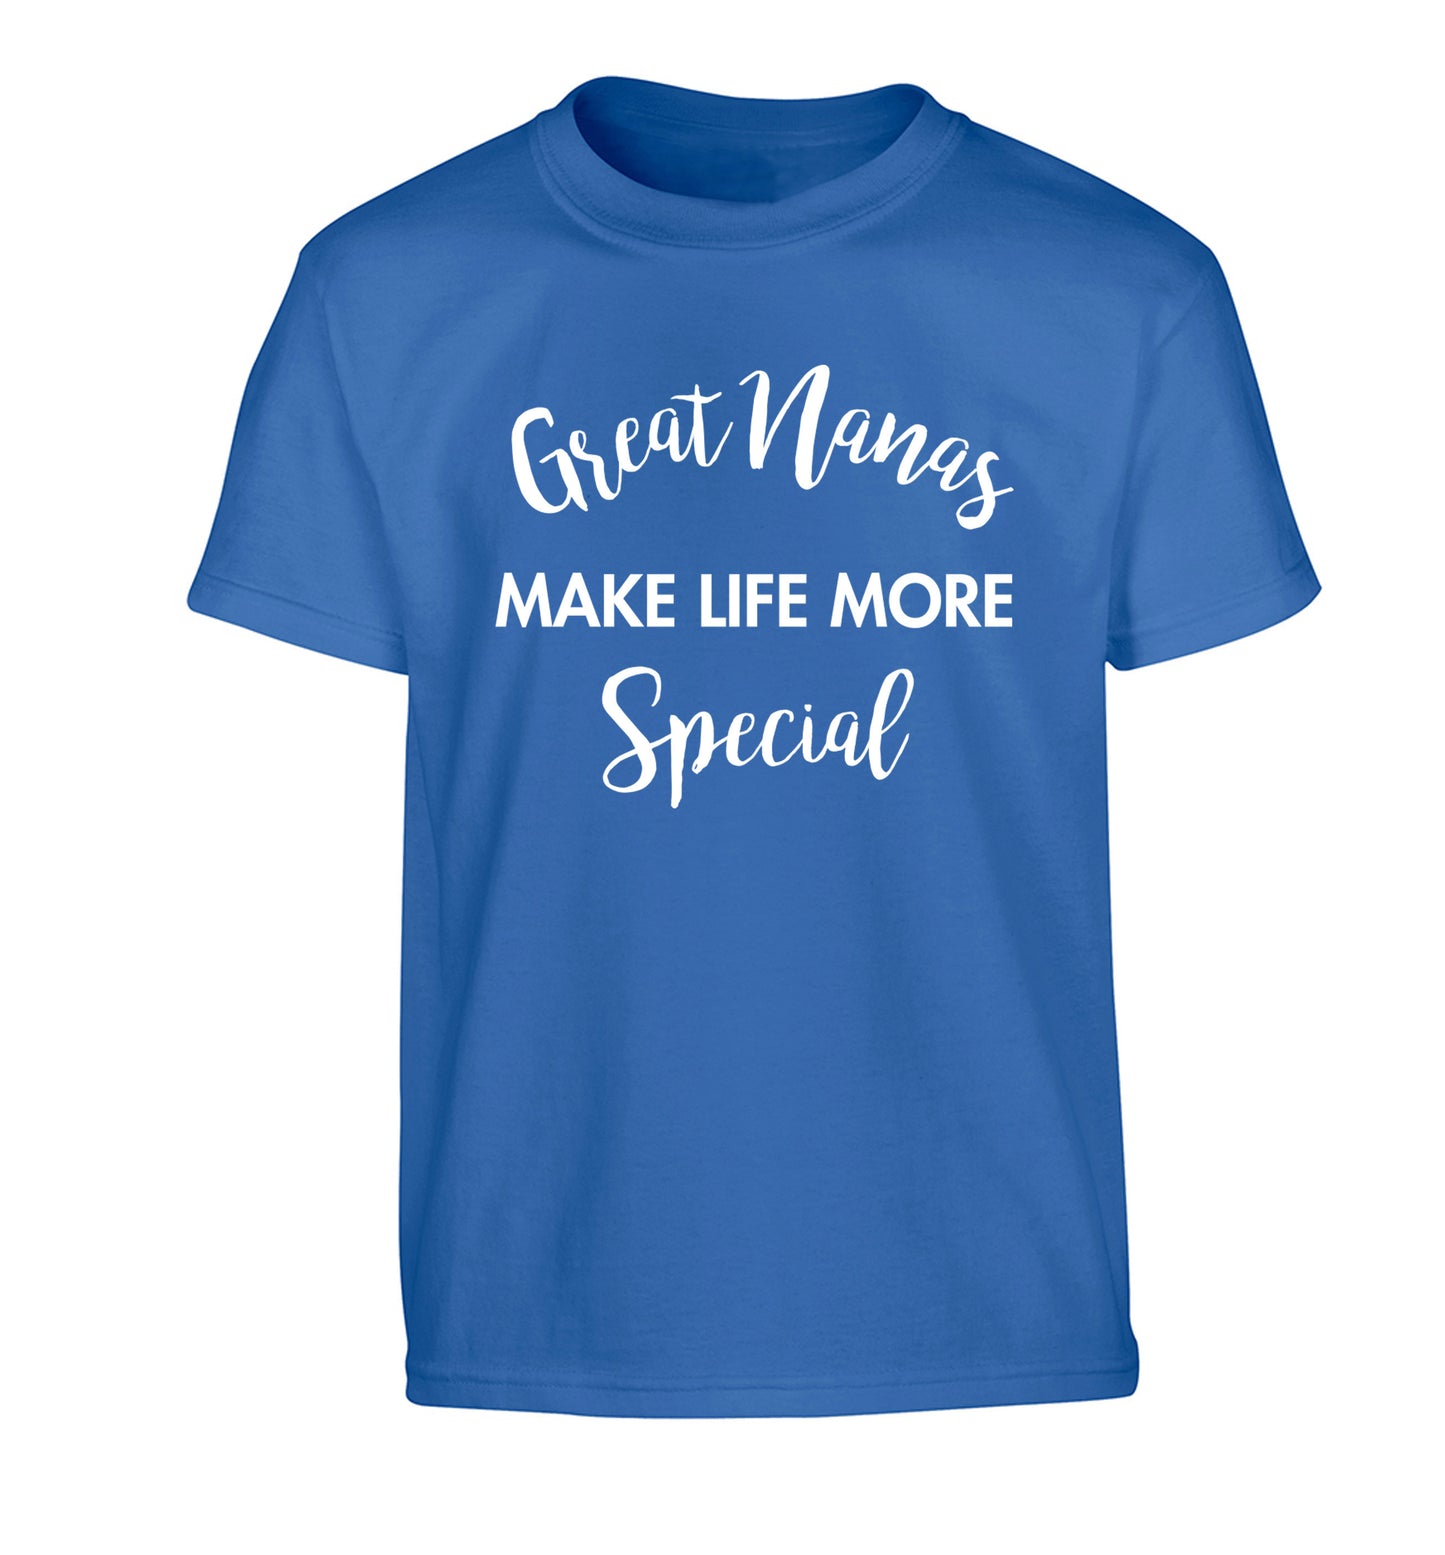 Great nanas make life more special Children's blue Tshirt 12-14 Years